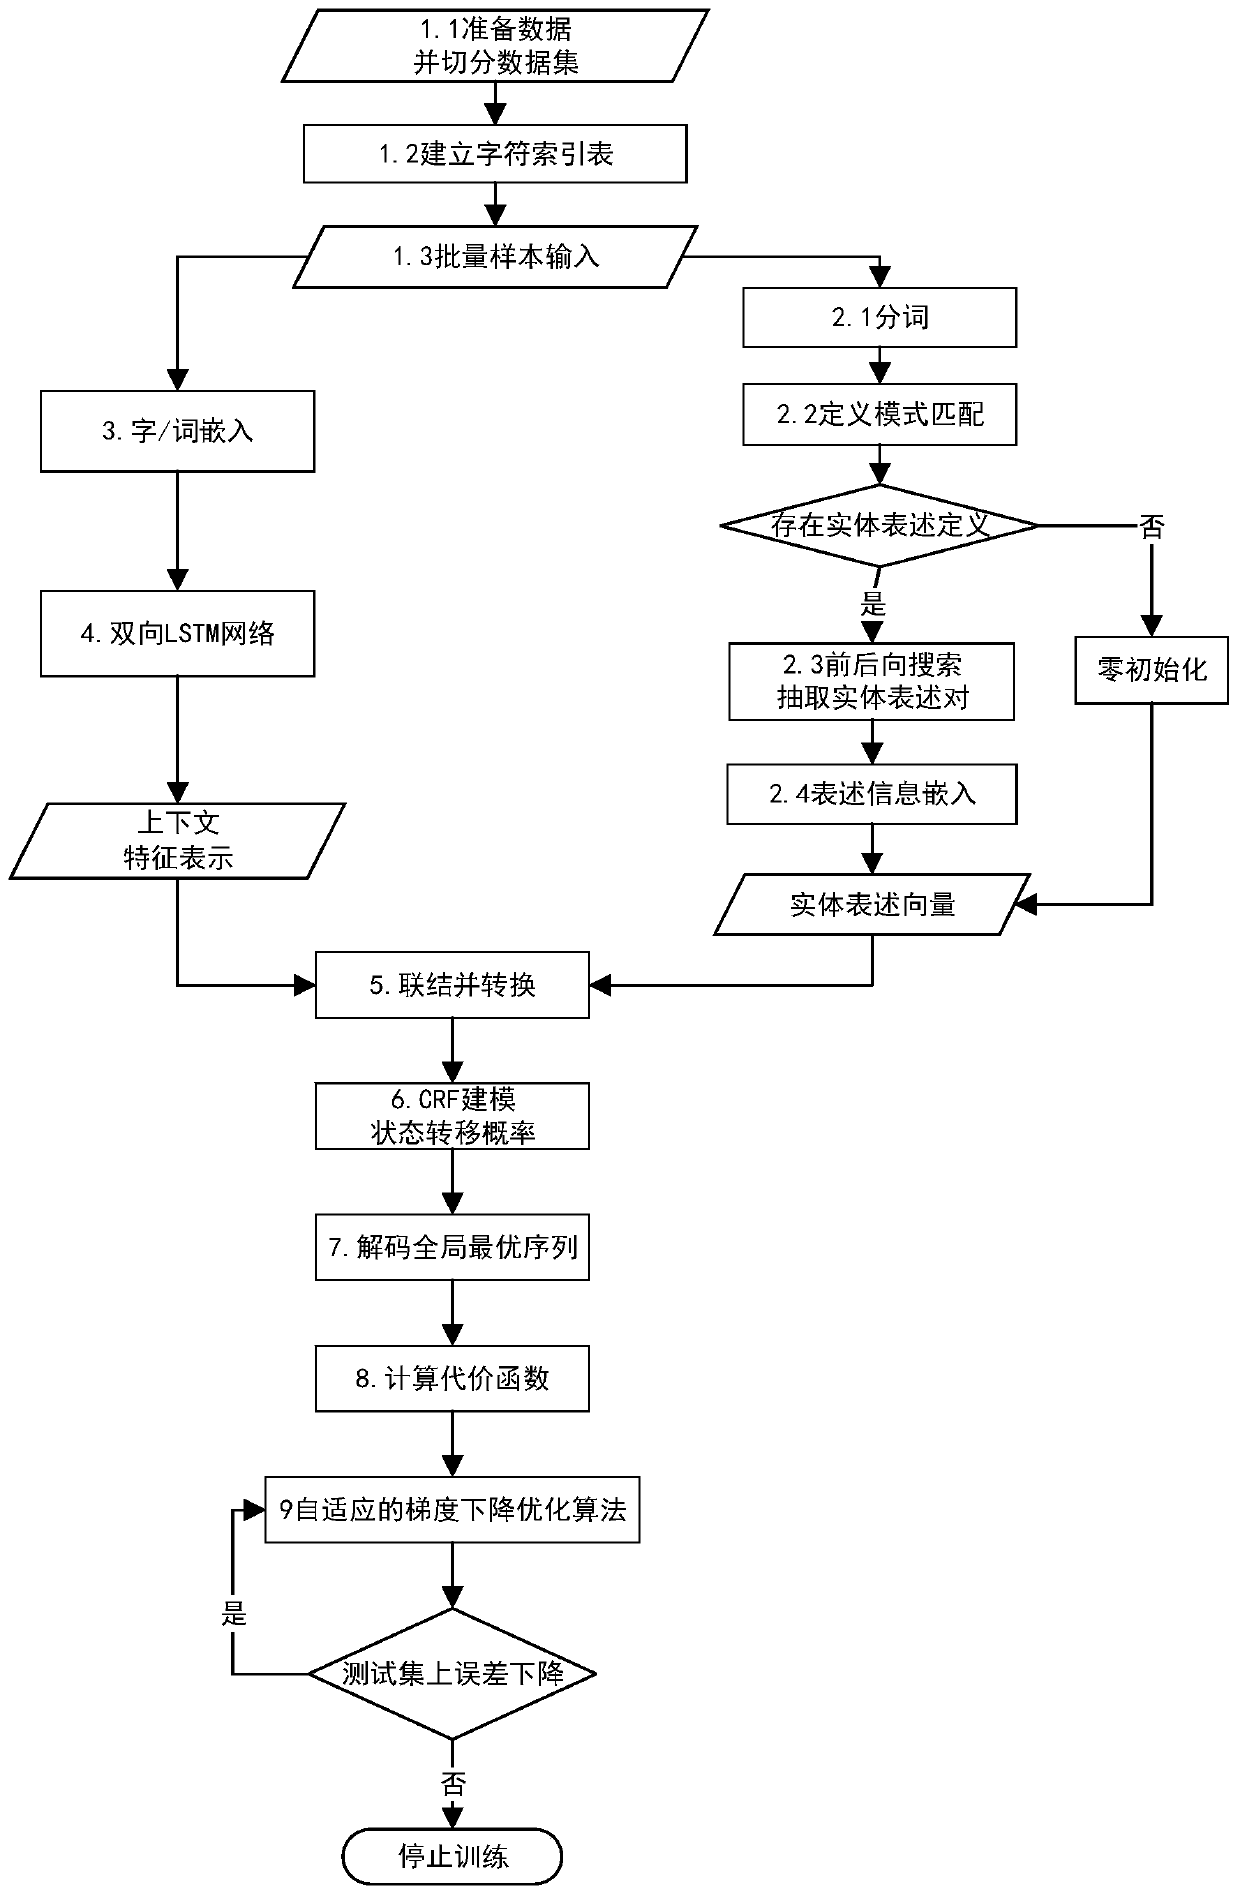 Text language association extraction method and system based on recurrent neural network